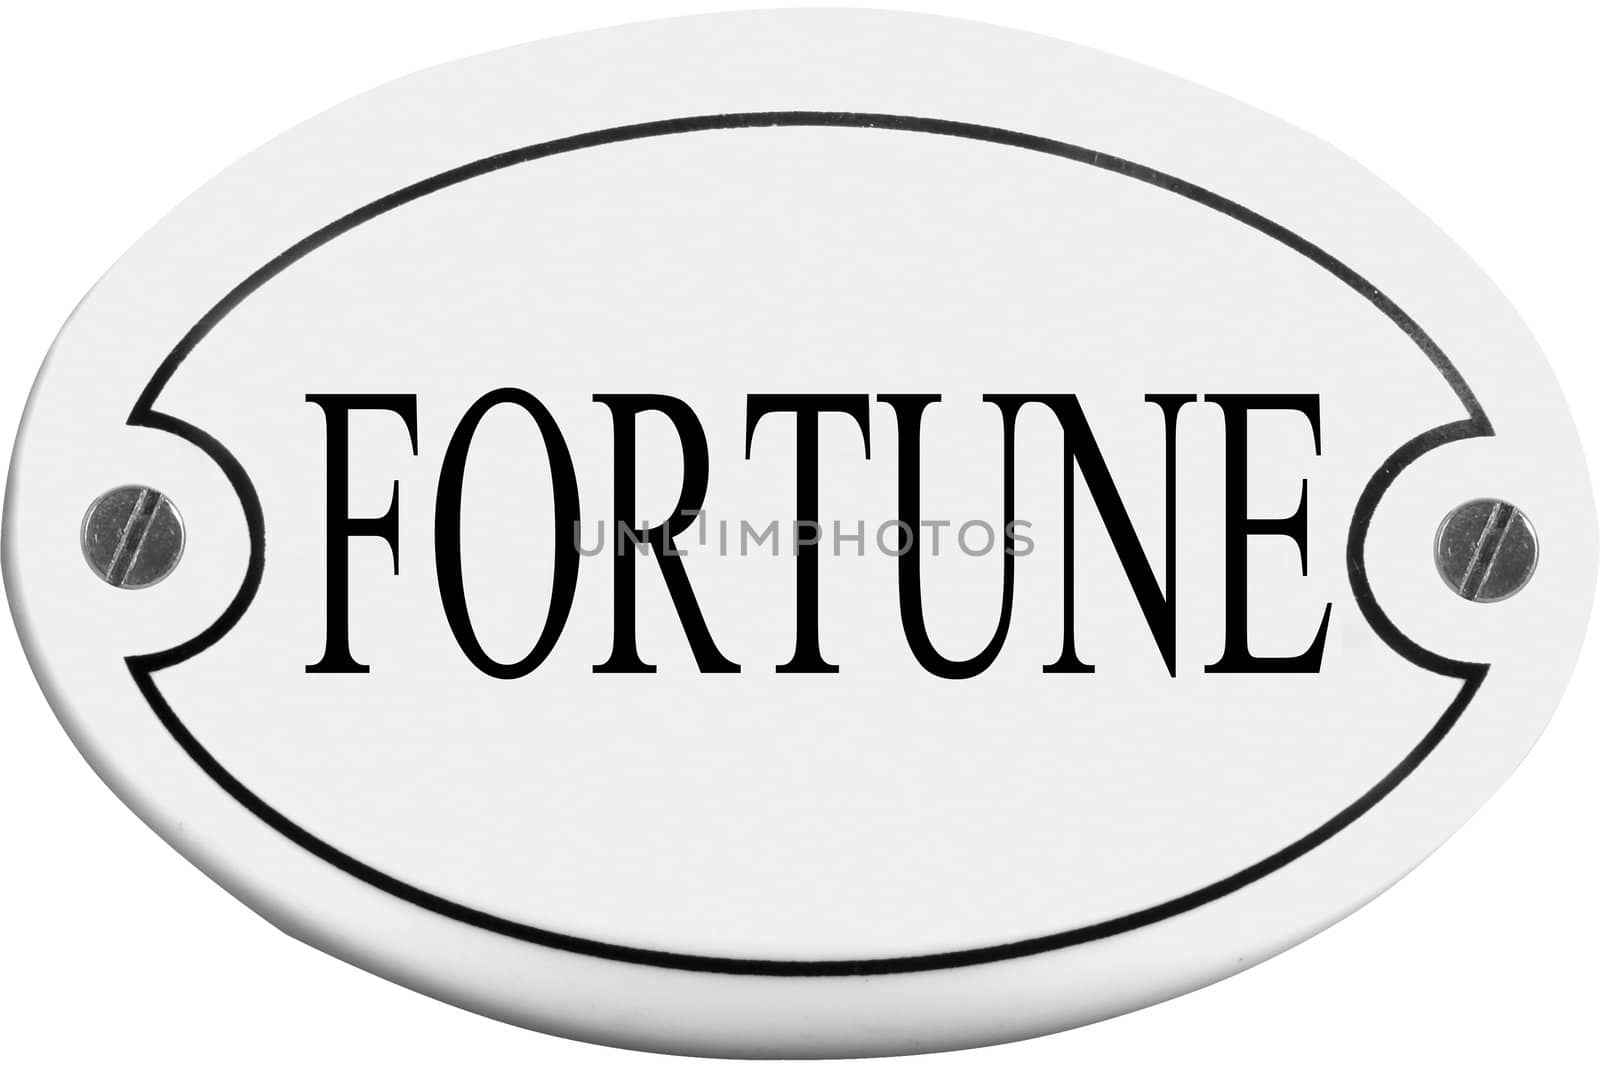 Old-fashioned door name plate  with text fortune